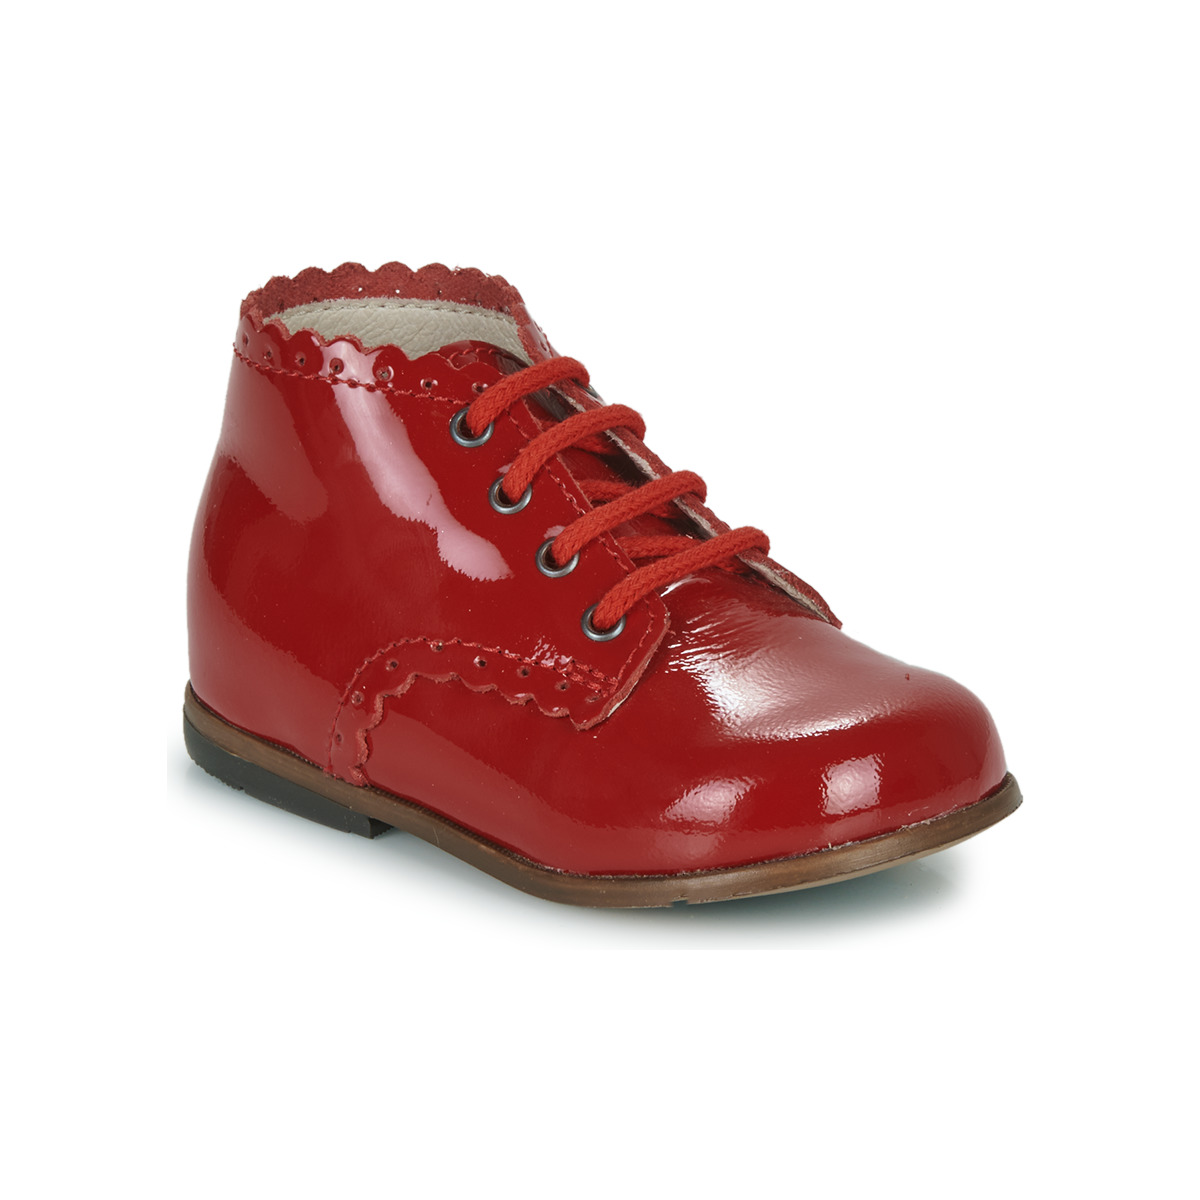 Shoes Girl High top trainers Little Mary VIVALDI Red